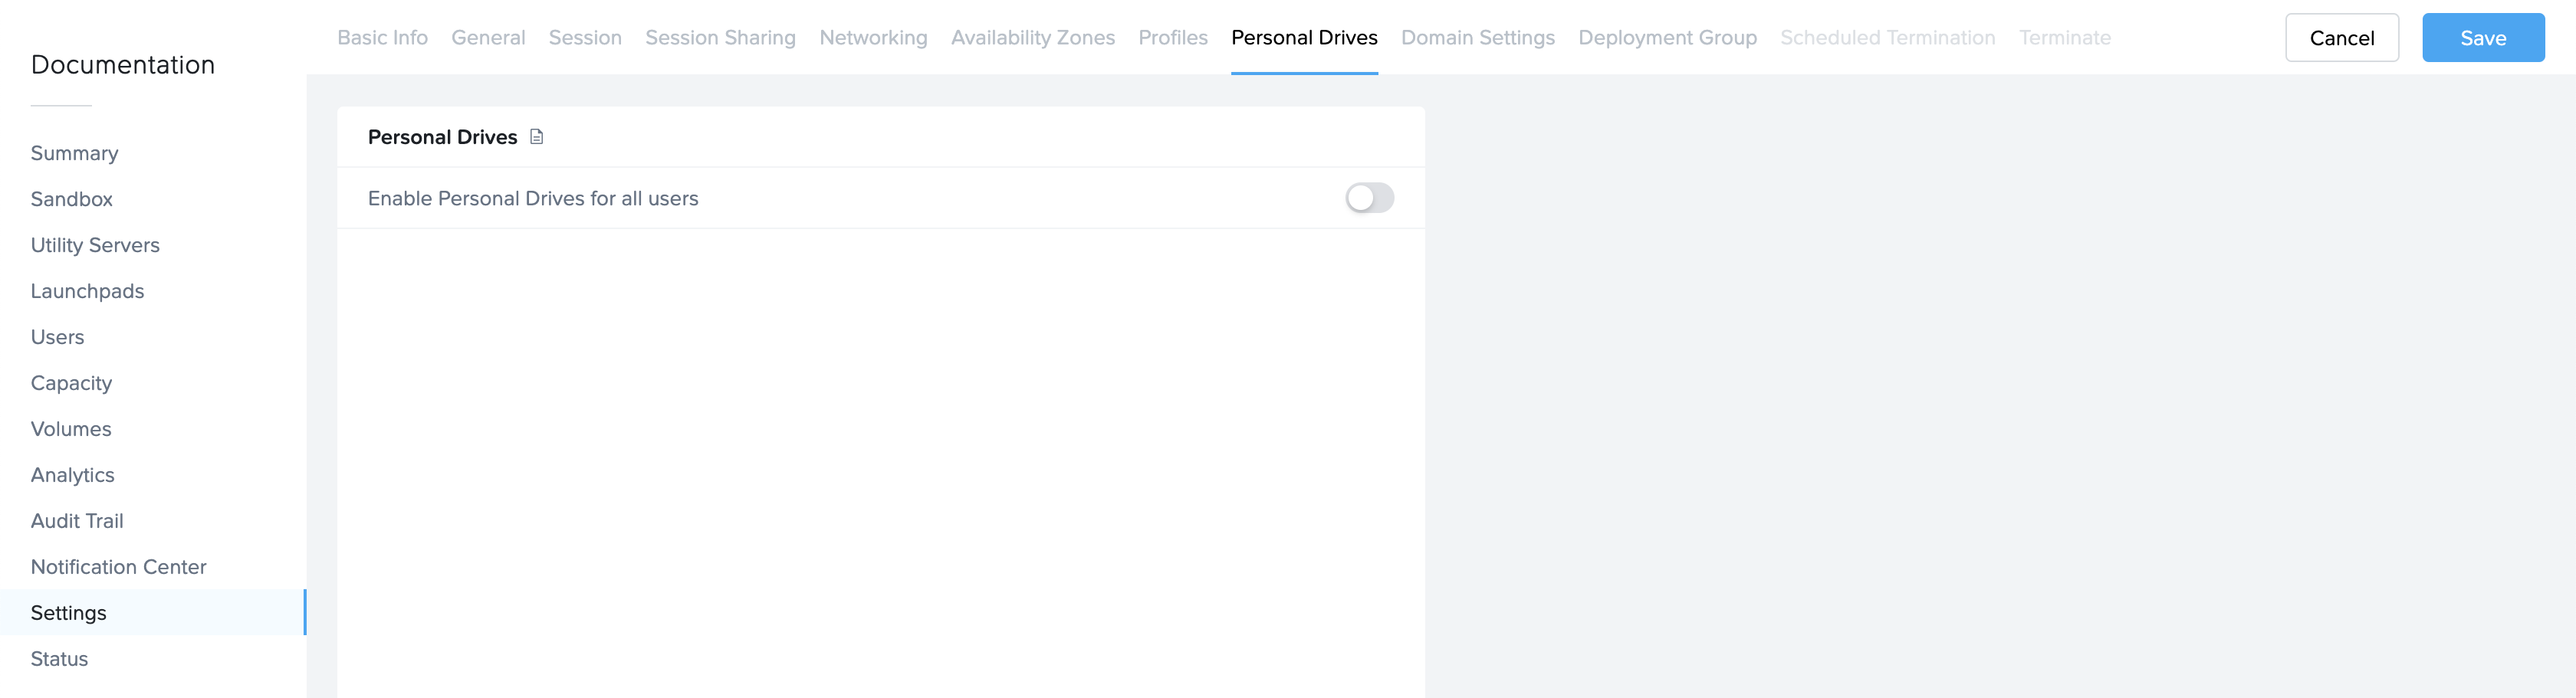 Disable Personal Drives